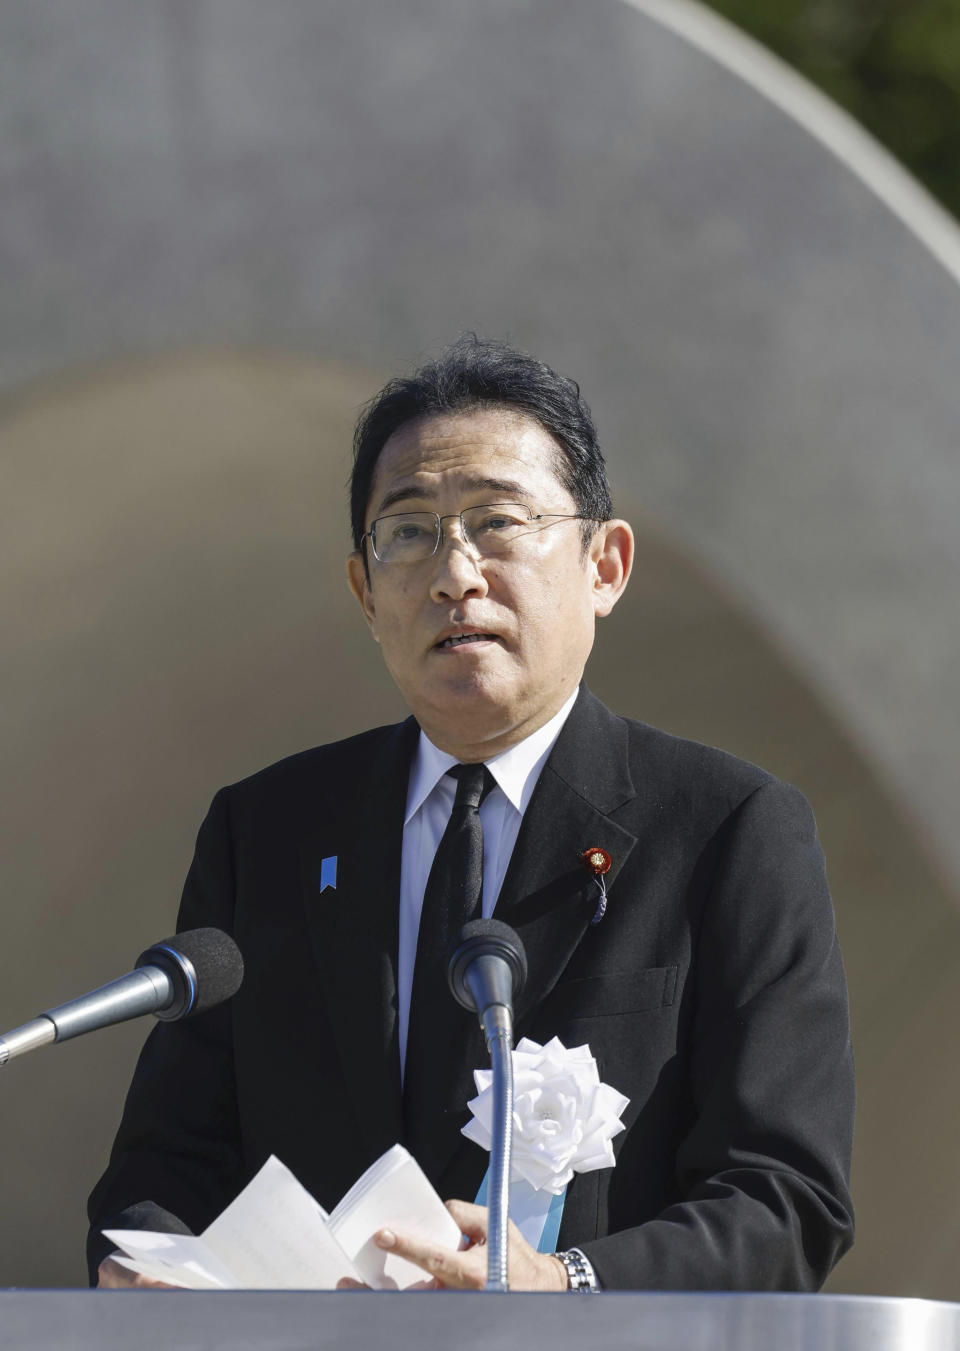 Japan's Prime Minister Fumio Kishida delivers a speech during a ceremony marking the 78th anniversary of the world's first atomic bombing at the Hiroshima Peace Memorial Park in Hiroshima, western Japan Sunday, Aug. 6, 2023. (Kyodo News via AP)